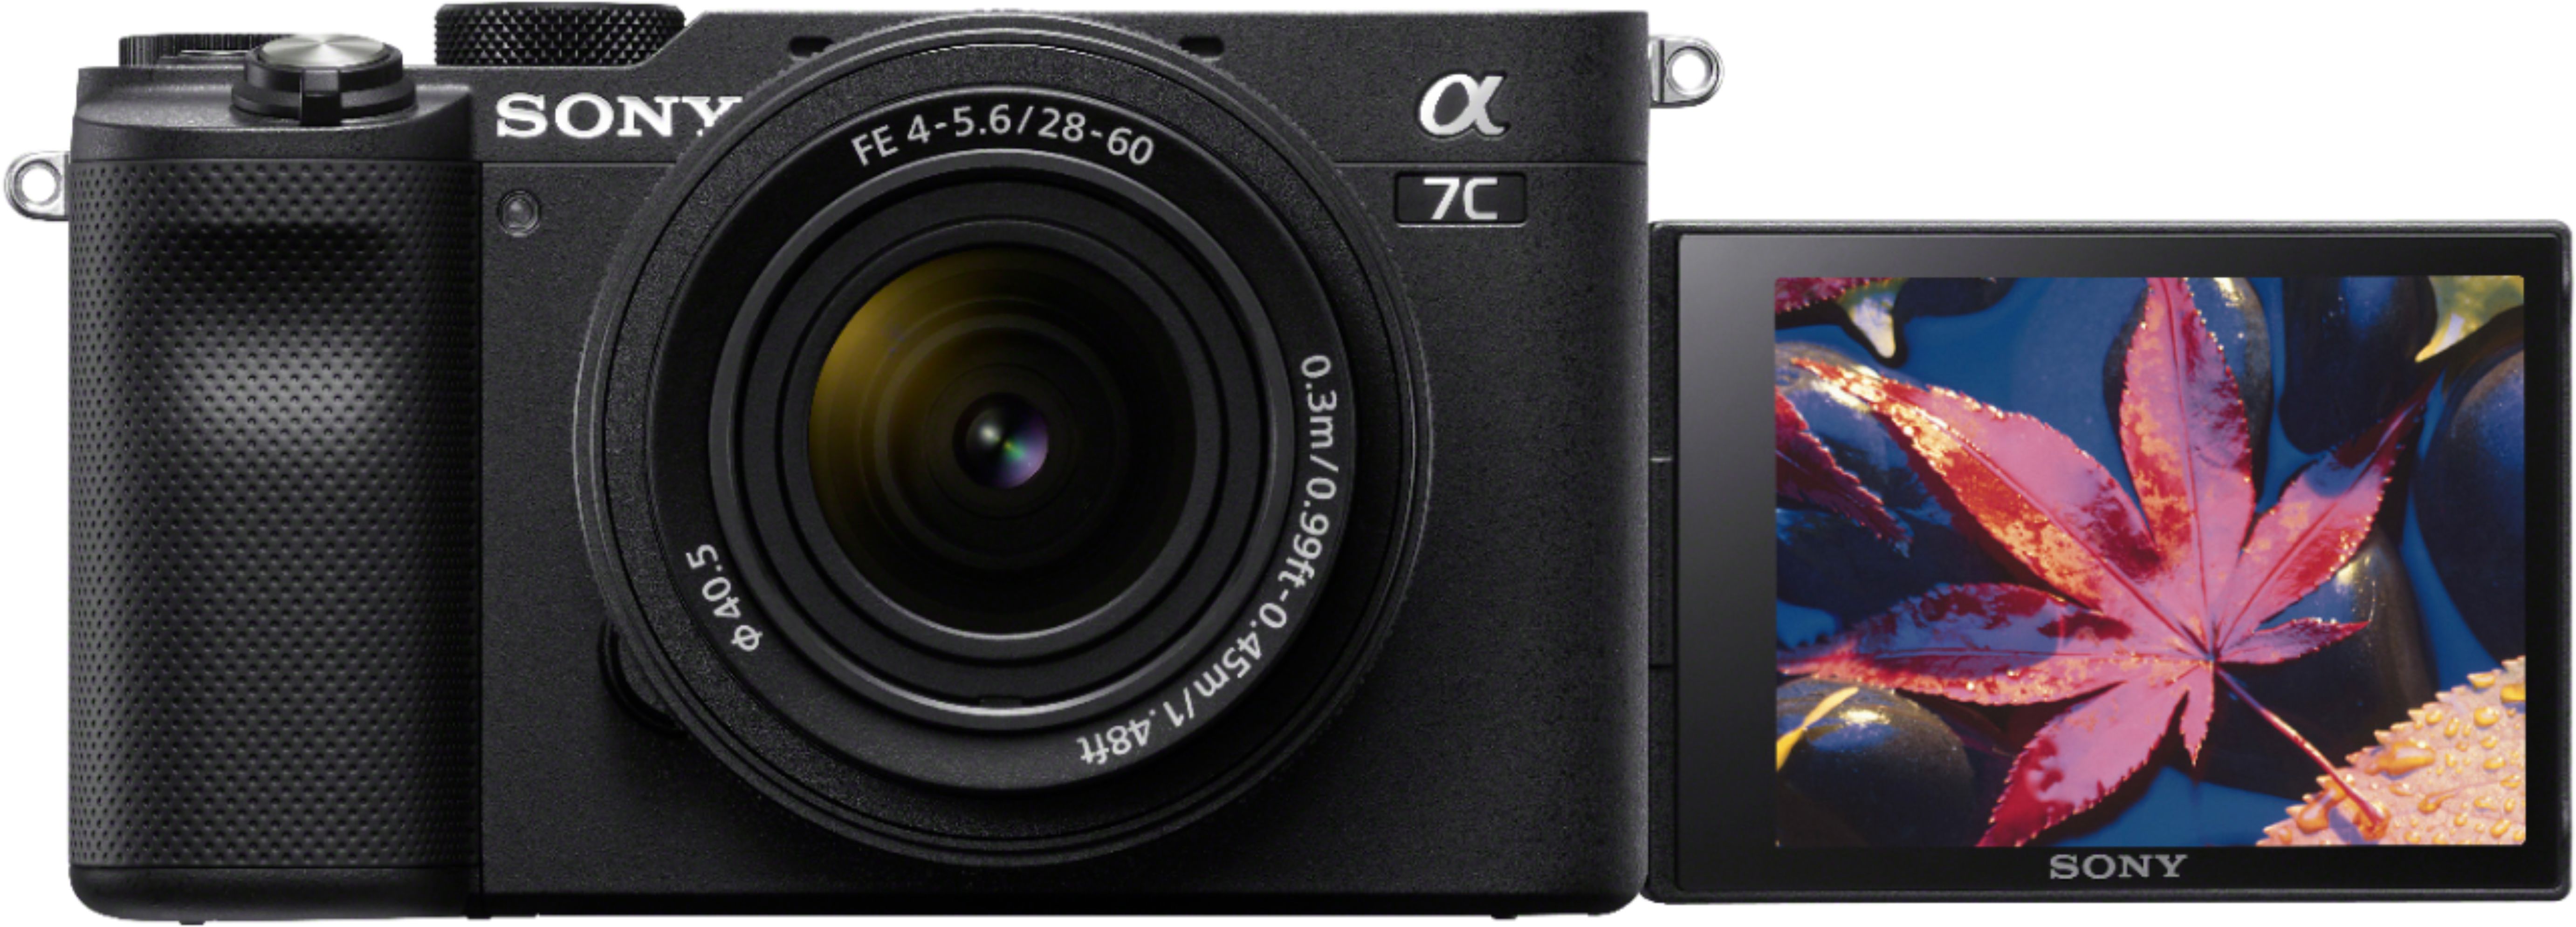 Sony Alpha 7C Full-frame Compact Mirrorless Camera with FE 28 